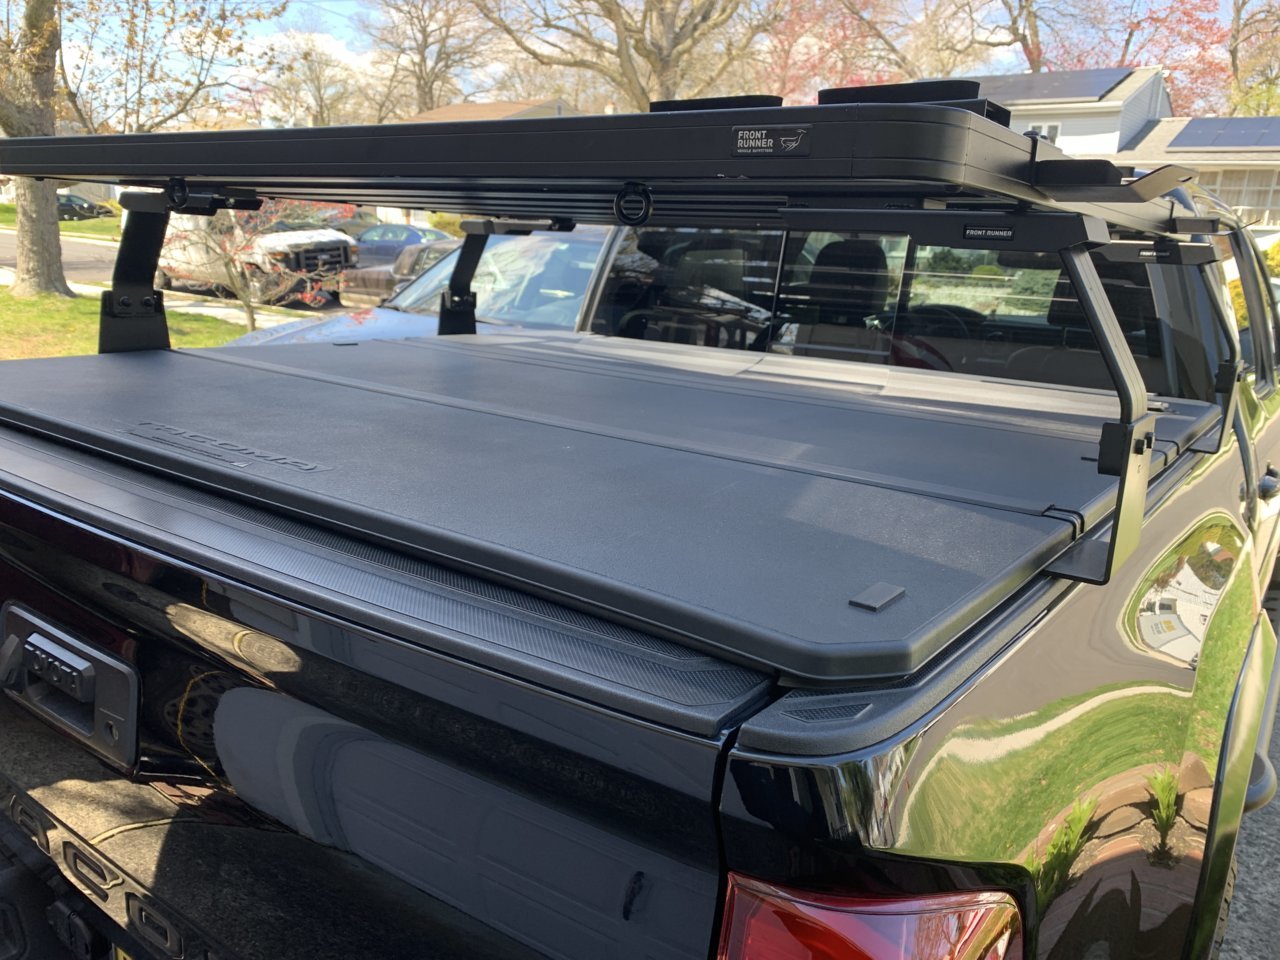 Selling Oem Tonneau Cover And Side Steps And Bed Rack For Tonneau Cover